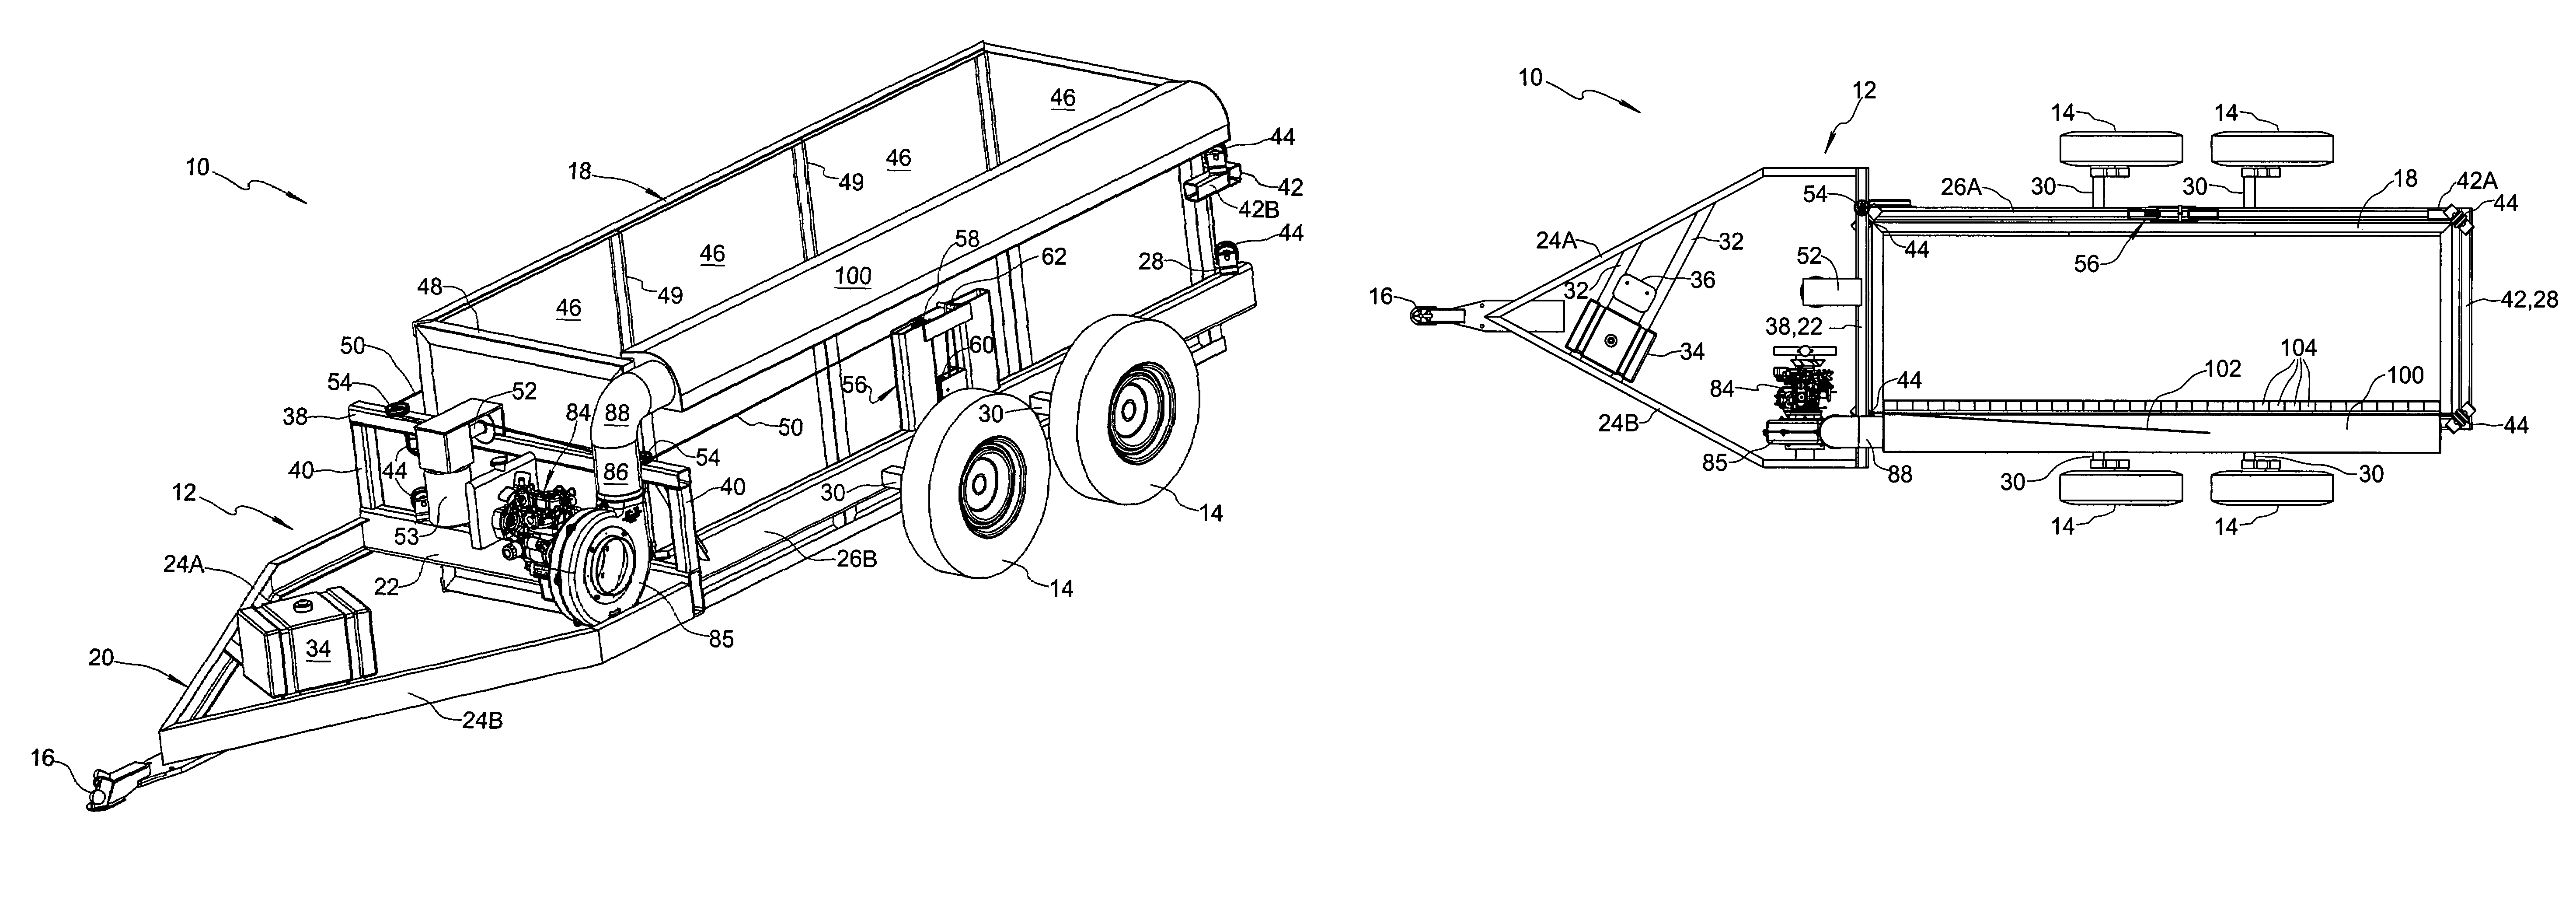 Transportable incineration apparatus and method